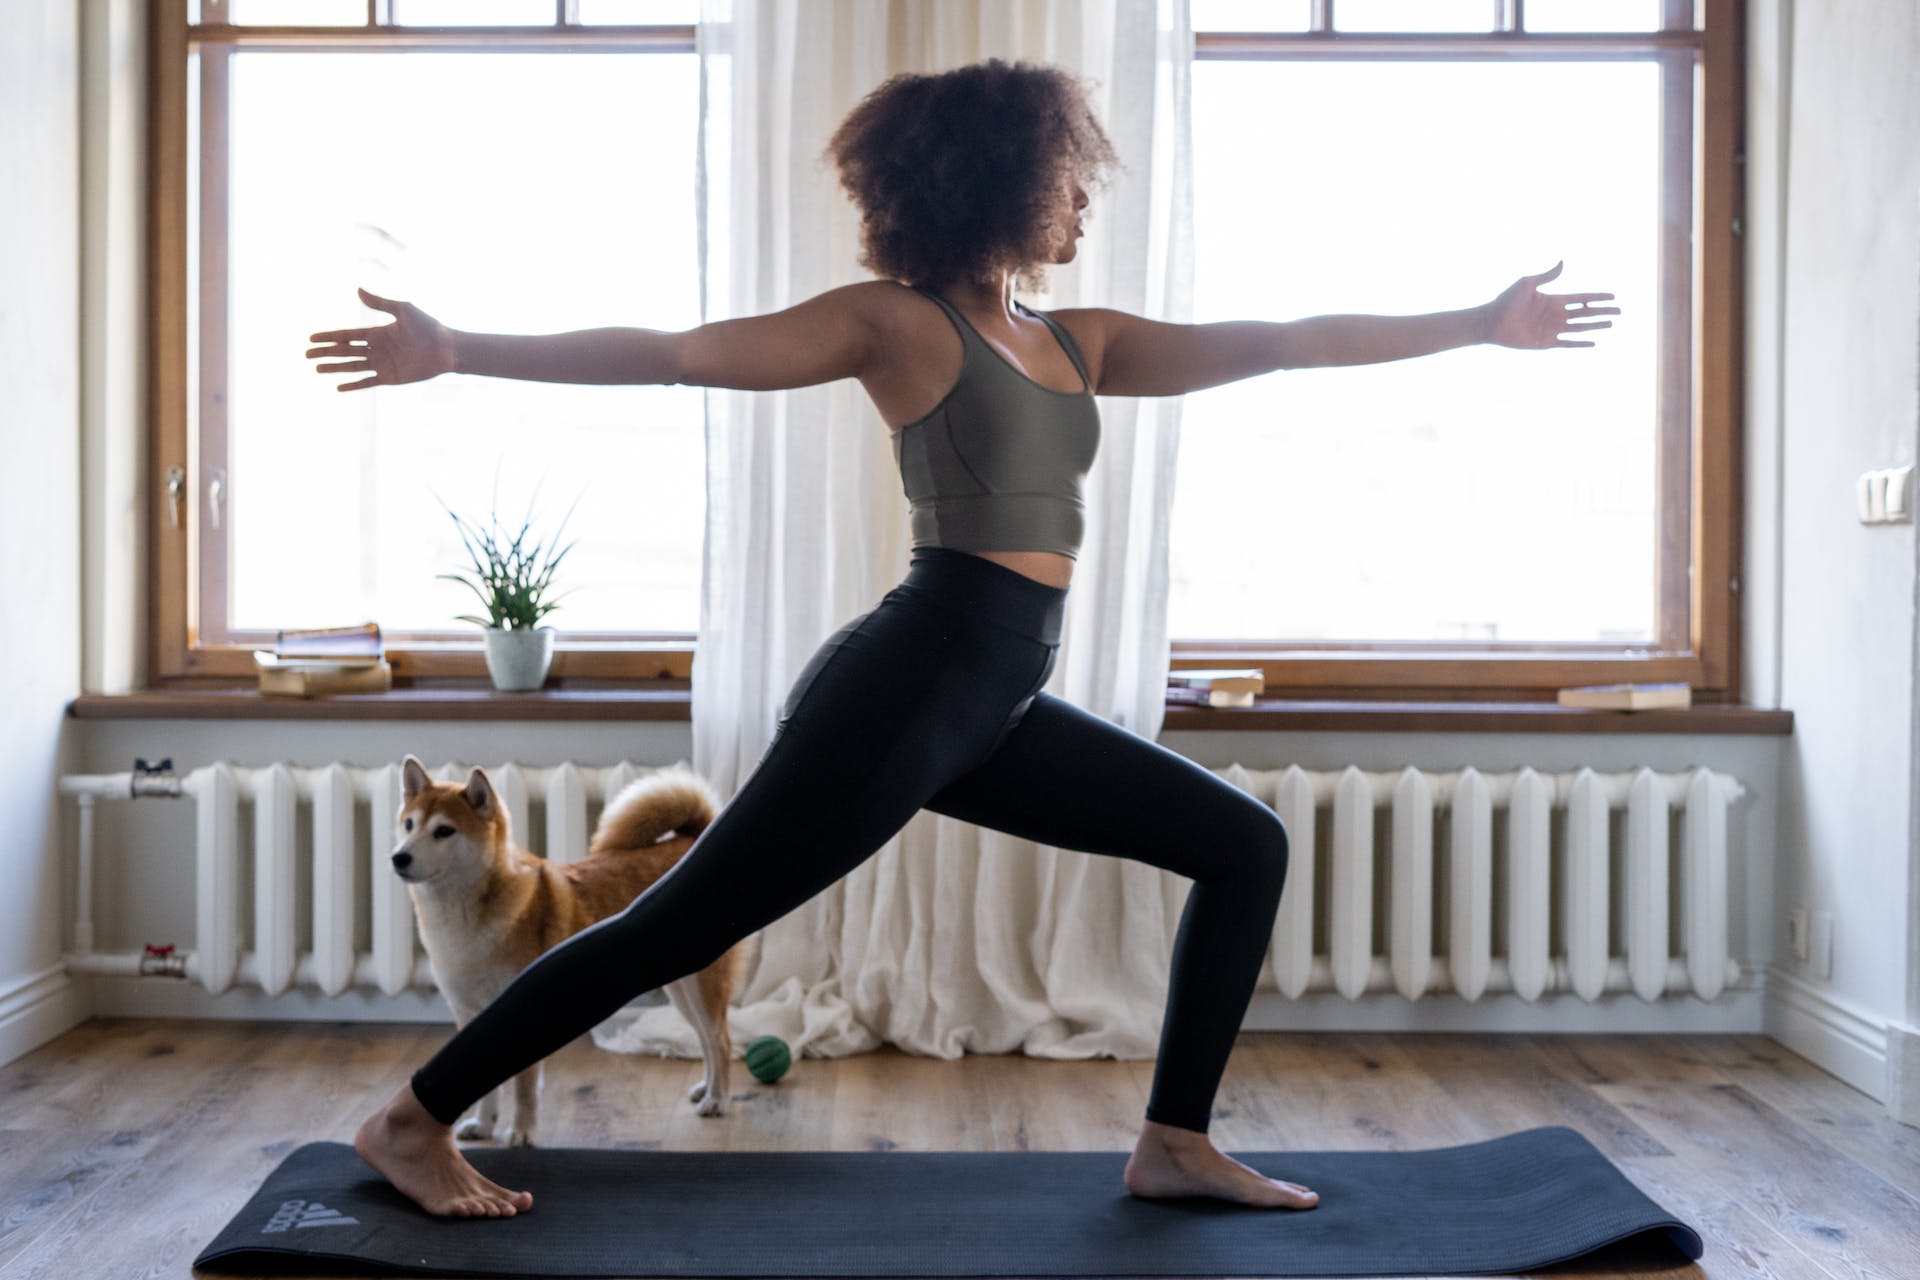 A woman practicing yoga indoors with her dog